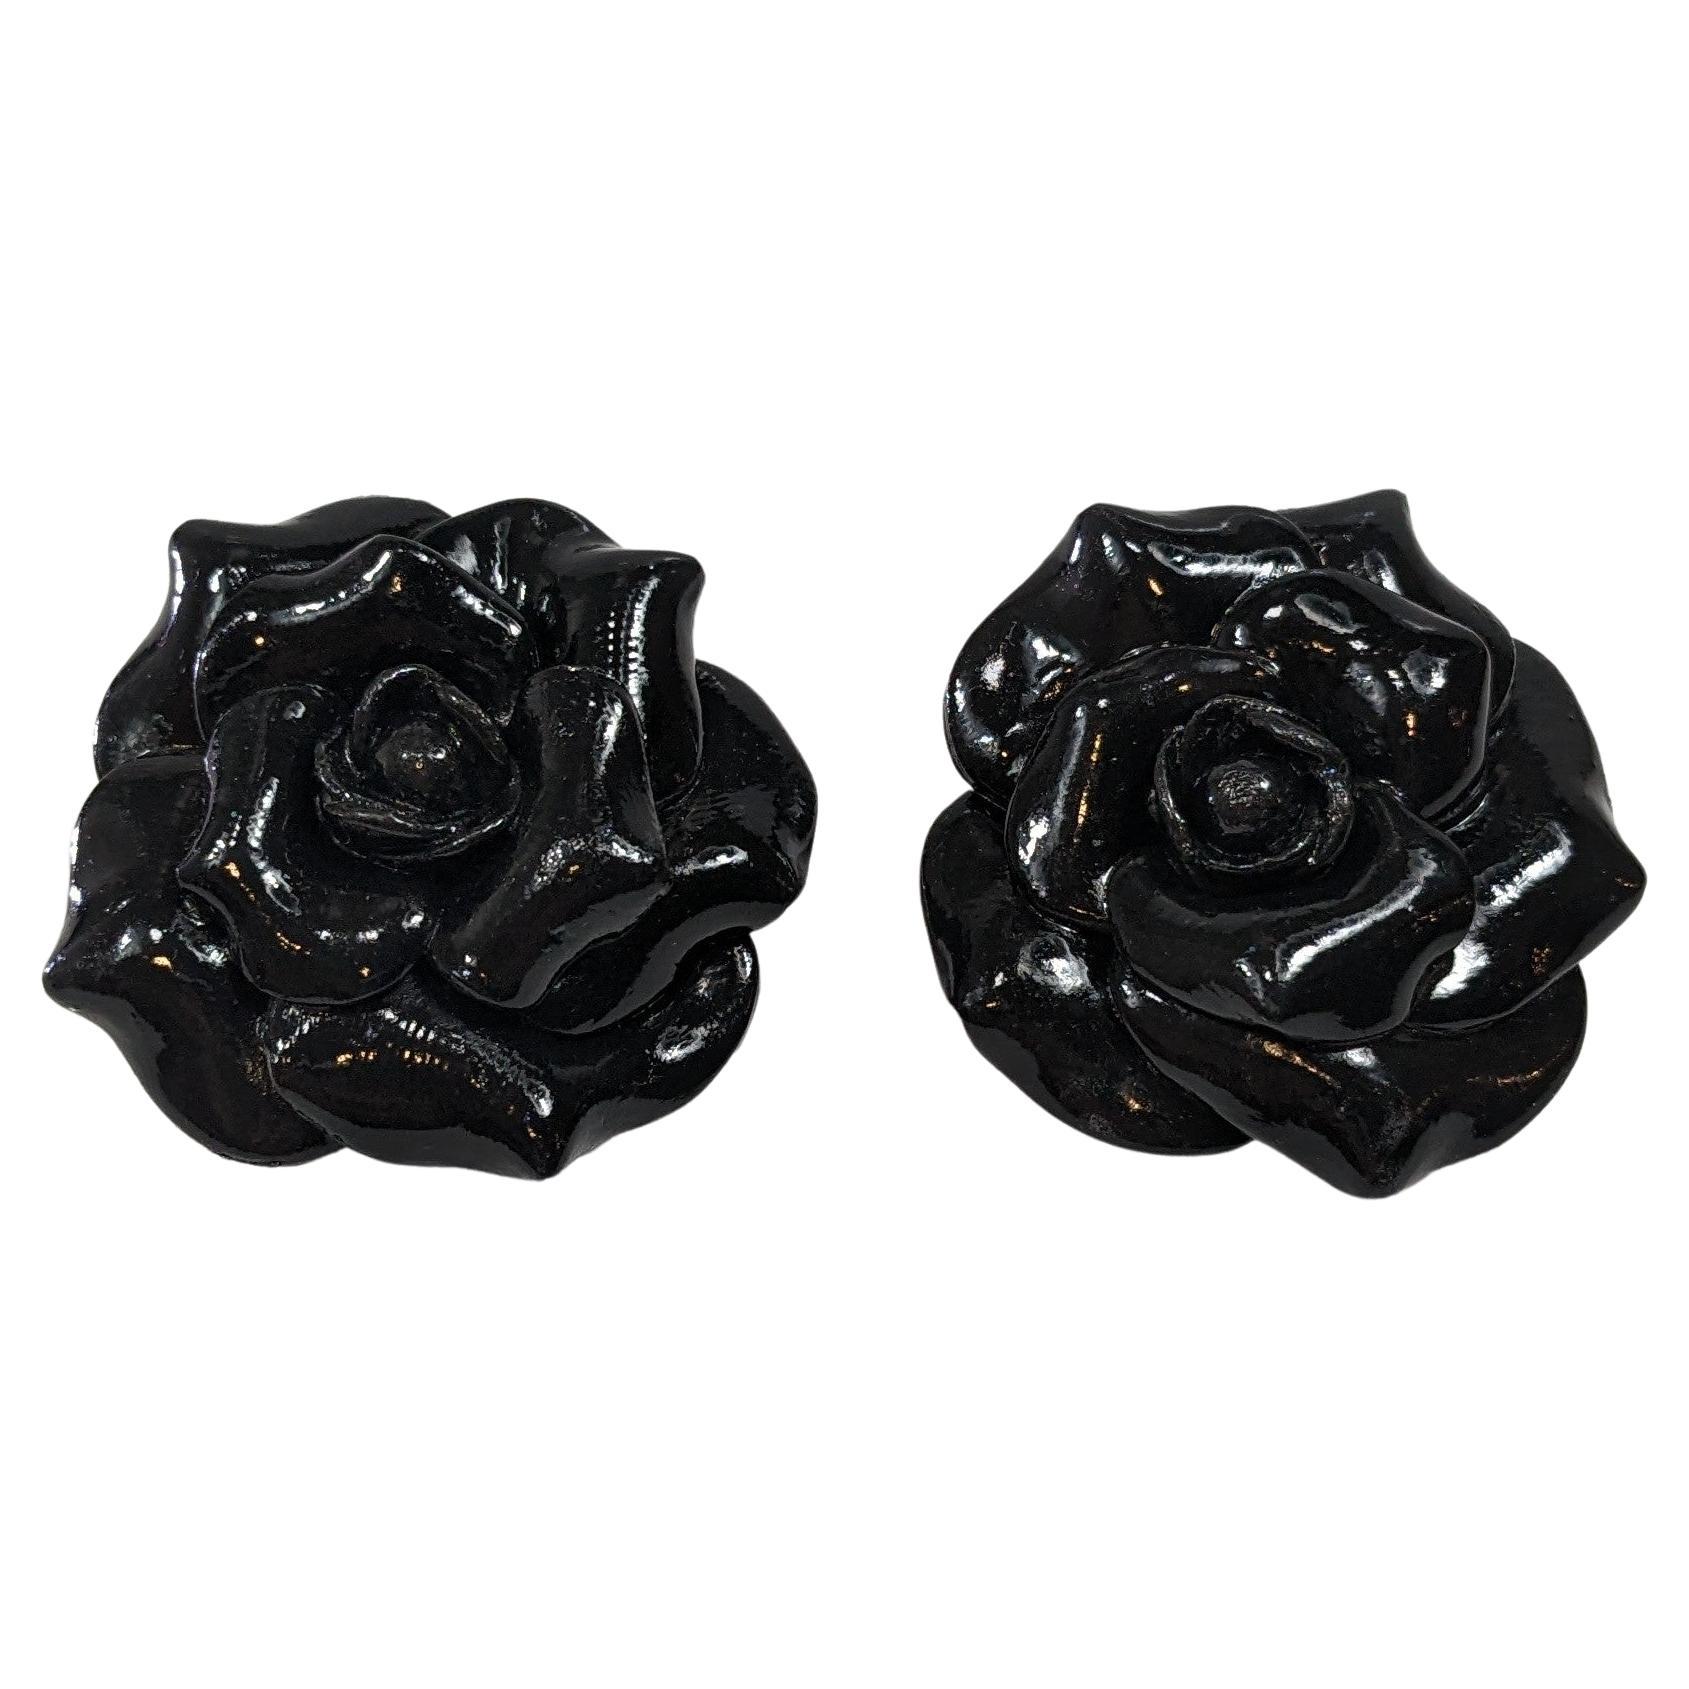  Black Camelia Polymer  Earrings with golplated silver closure For Sale